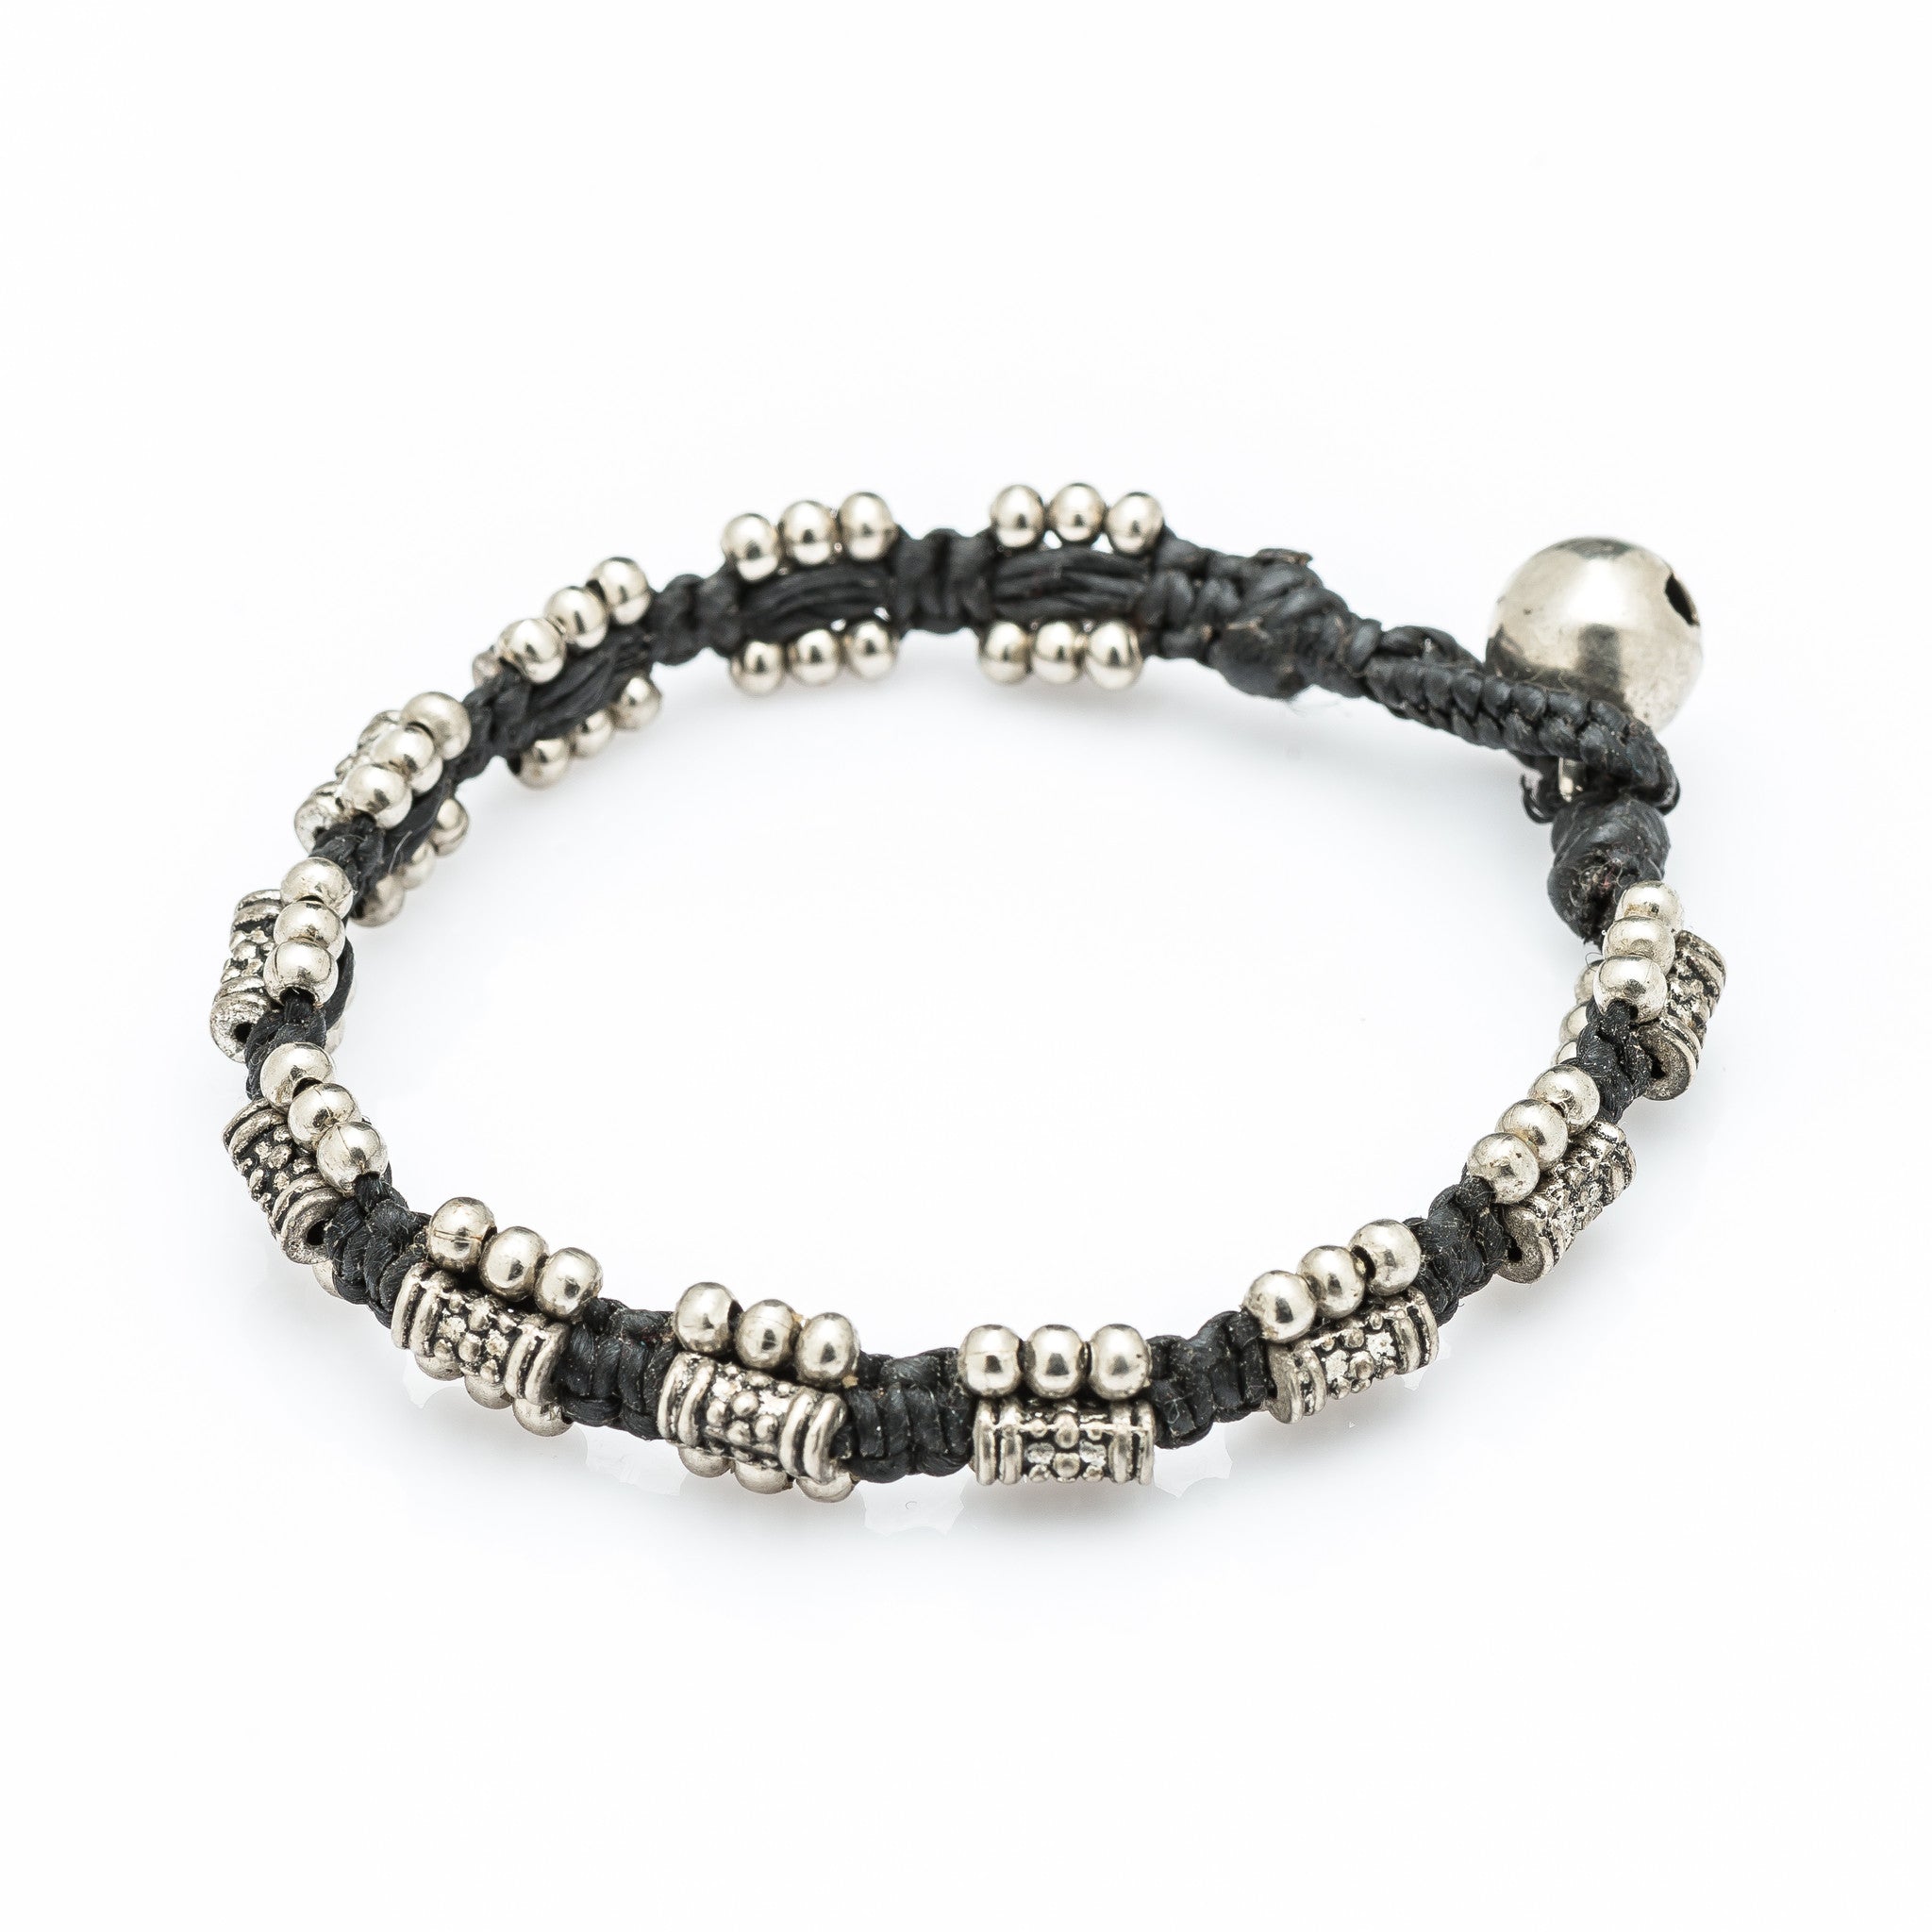 Hill Tribe Silver Bead And Rustic Charm Bracelets – Harem Pants